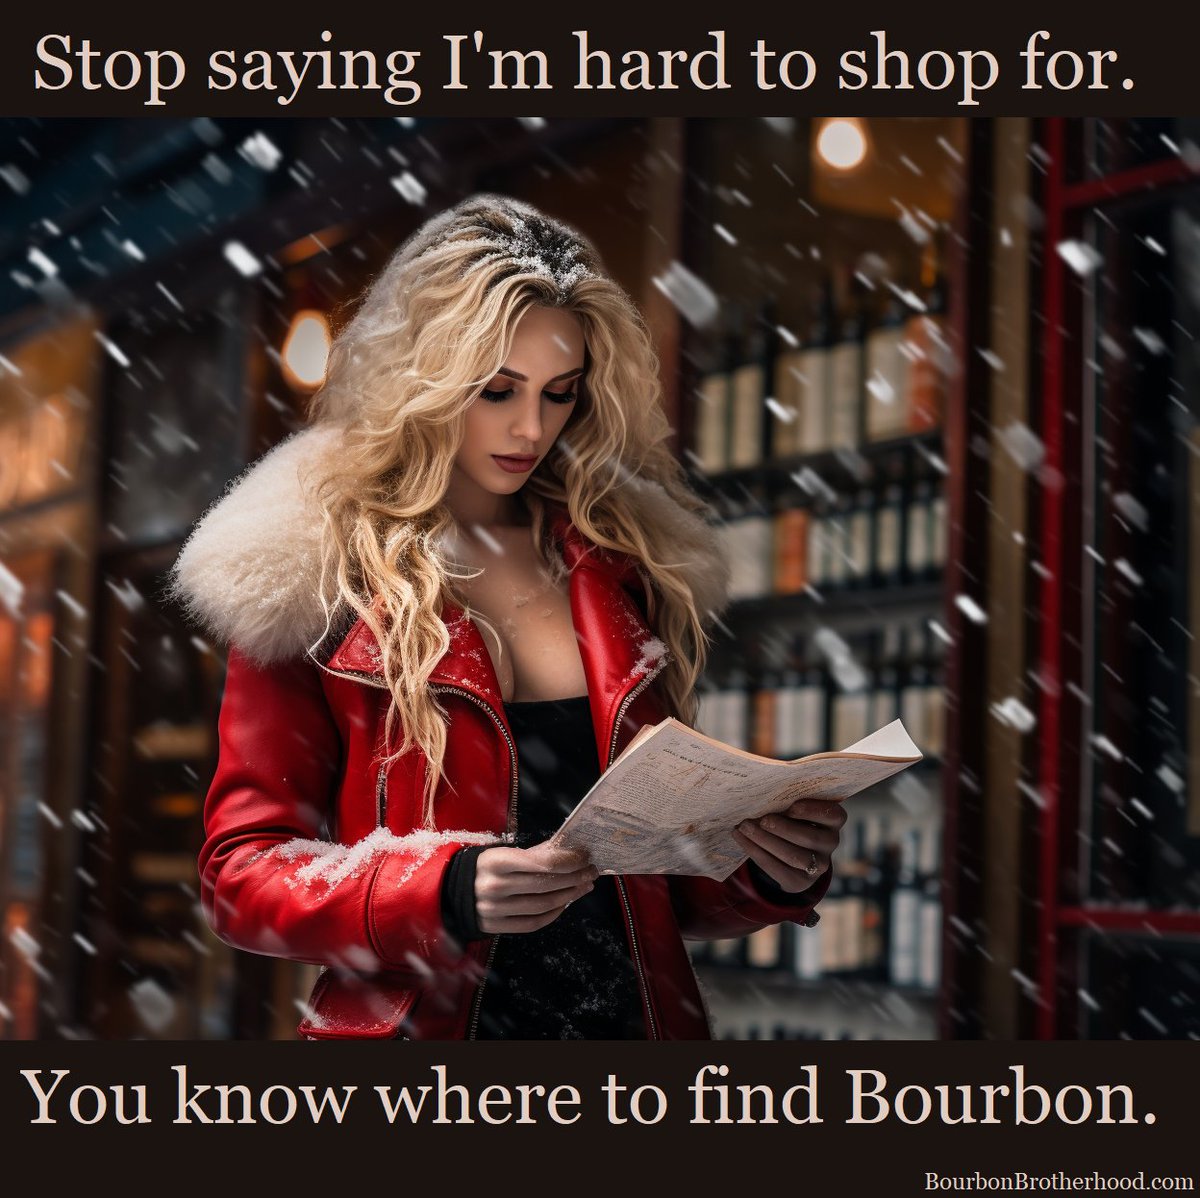 What are some good and bad gifts for bourbon enthusiasts?
.
#bourbon #whiskey #christmas #holidays #gifts #shopping #giftideas #giftsformen #xmas